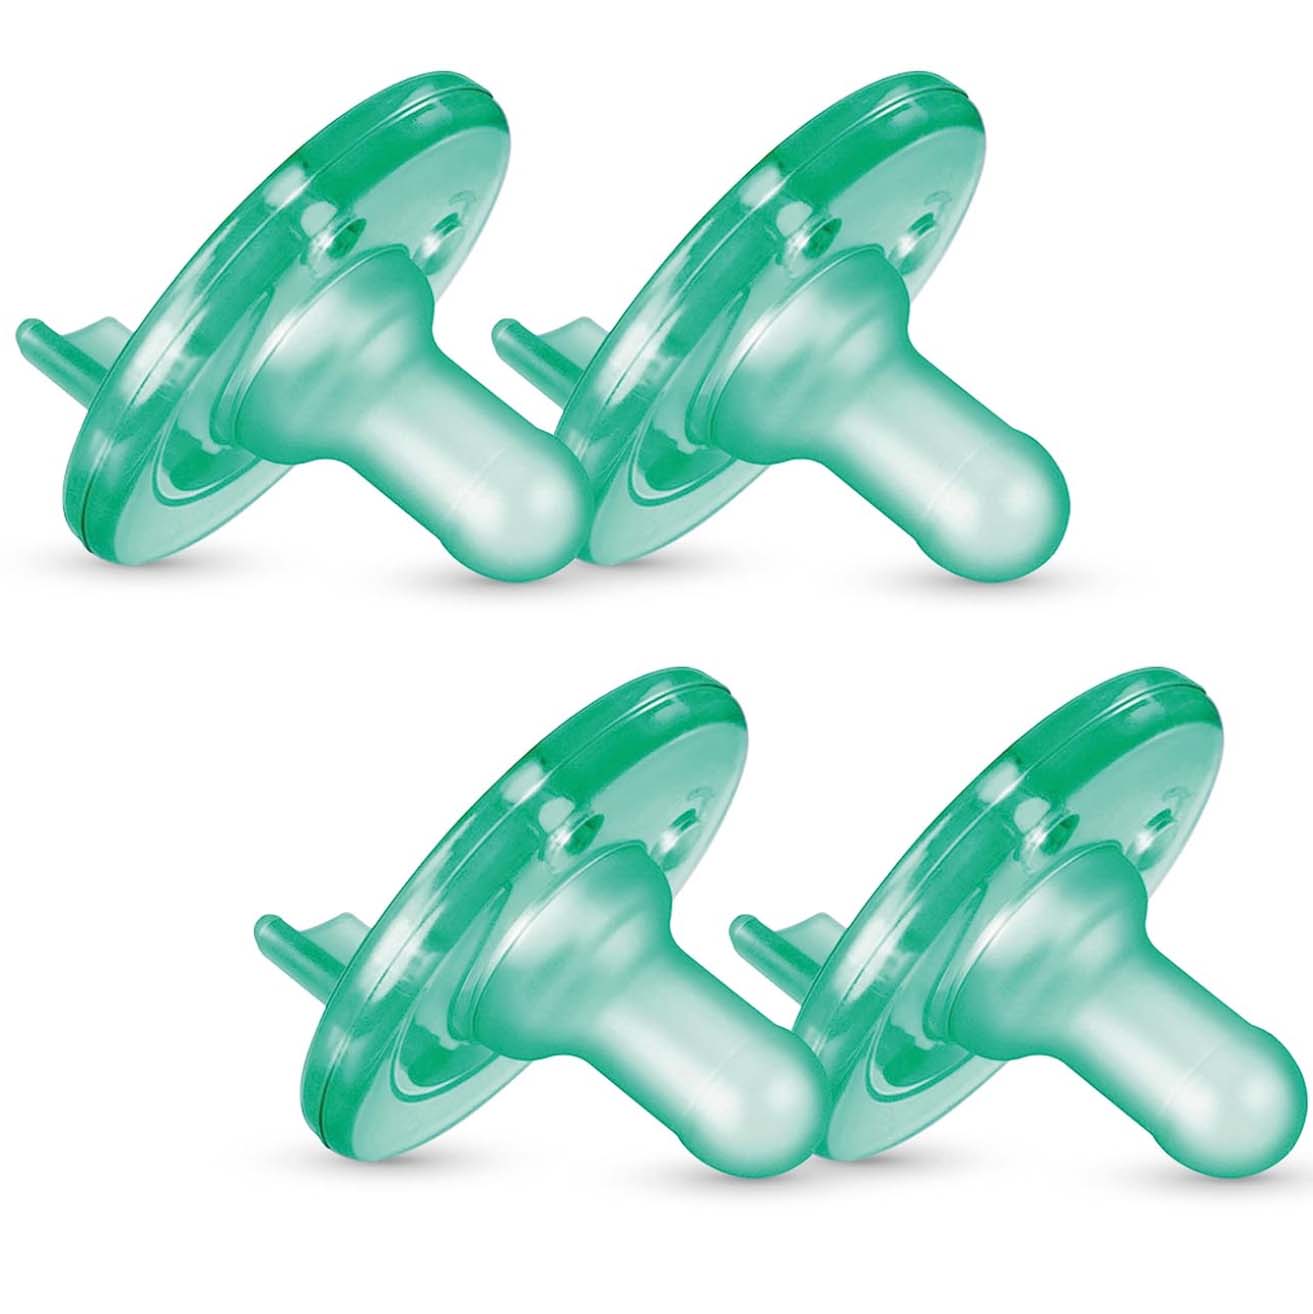 Four translucent green pacifiers